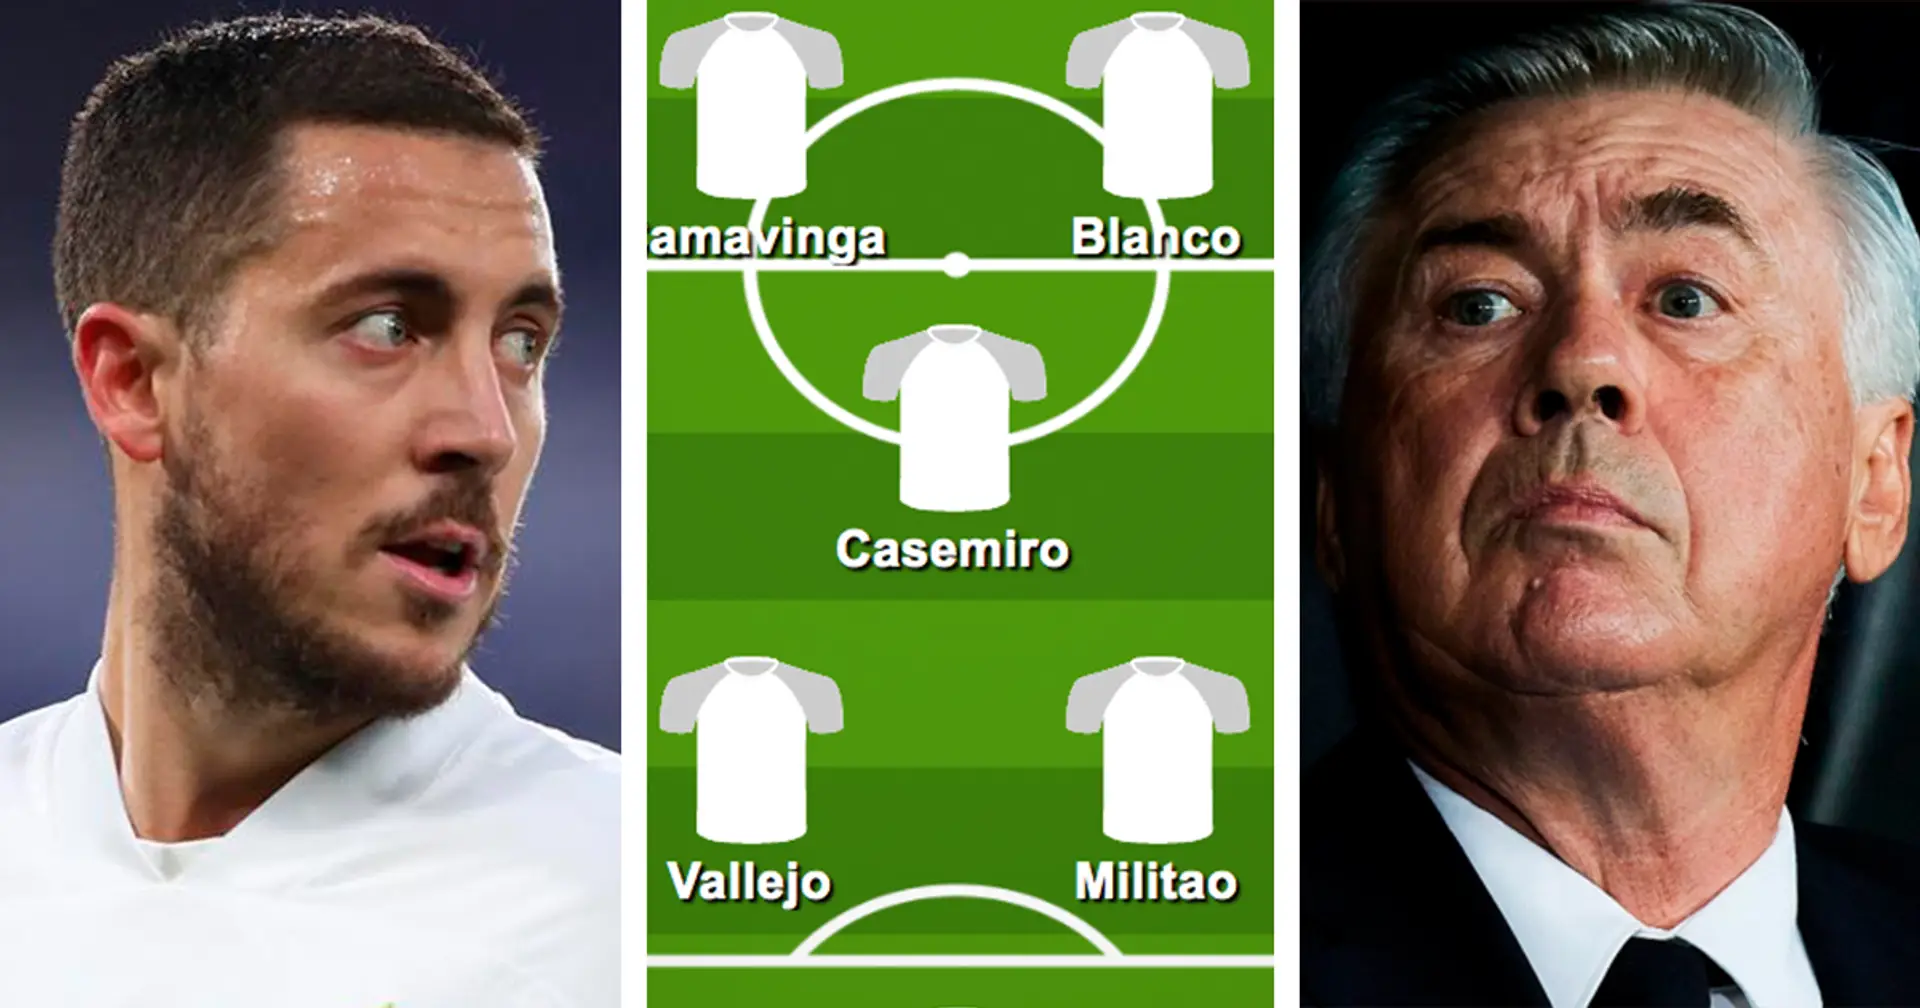 Hazard in? Select Real Madrid's ultimate XI for Sheriff clash from 3 options